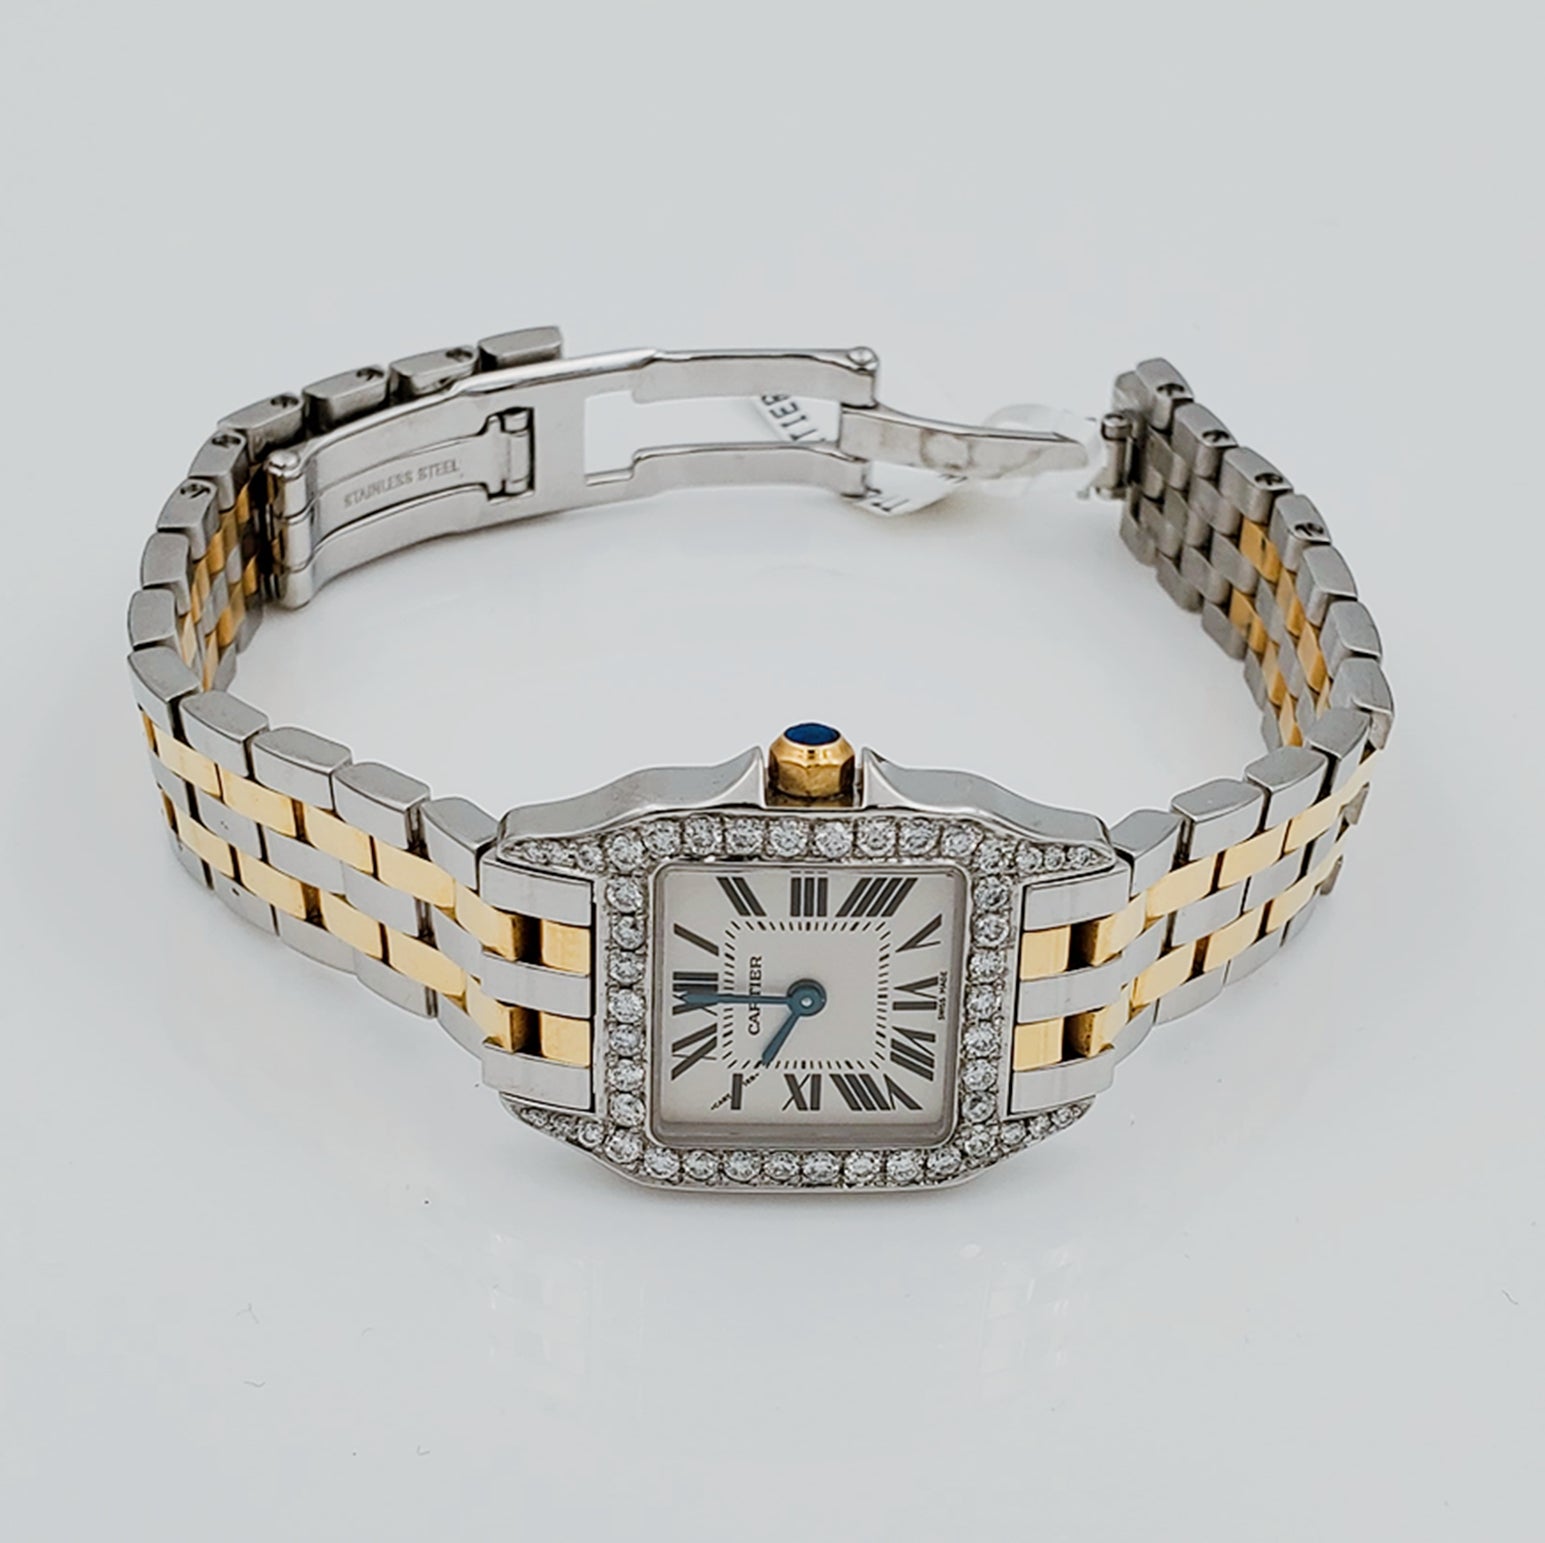 Ladies Small Cartier Santos Demoiselle 18K Yellow Gold / Stainless Steel Watch with Custom Diamond Bezel & Lugs. (Pre-Owned)